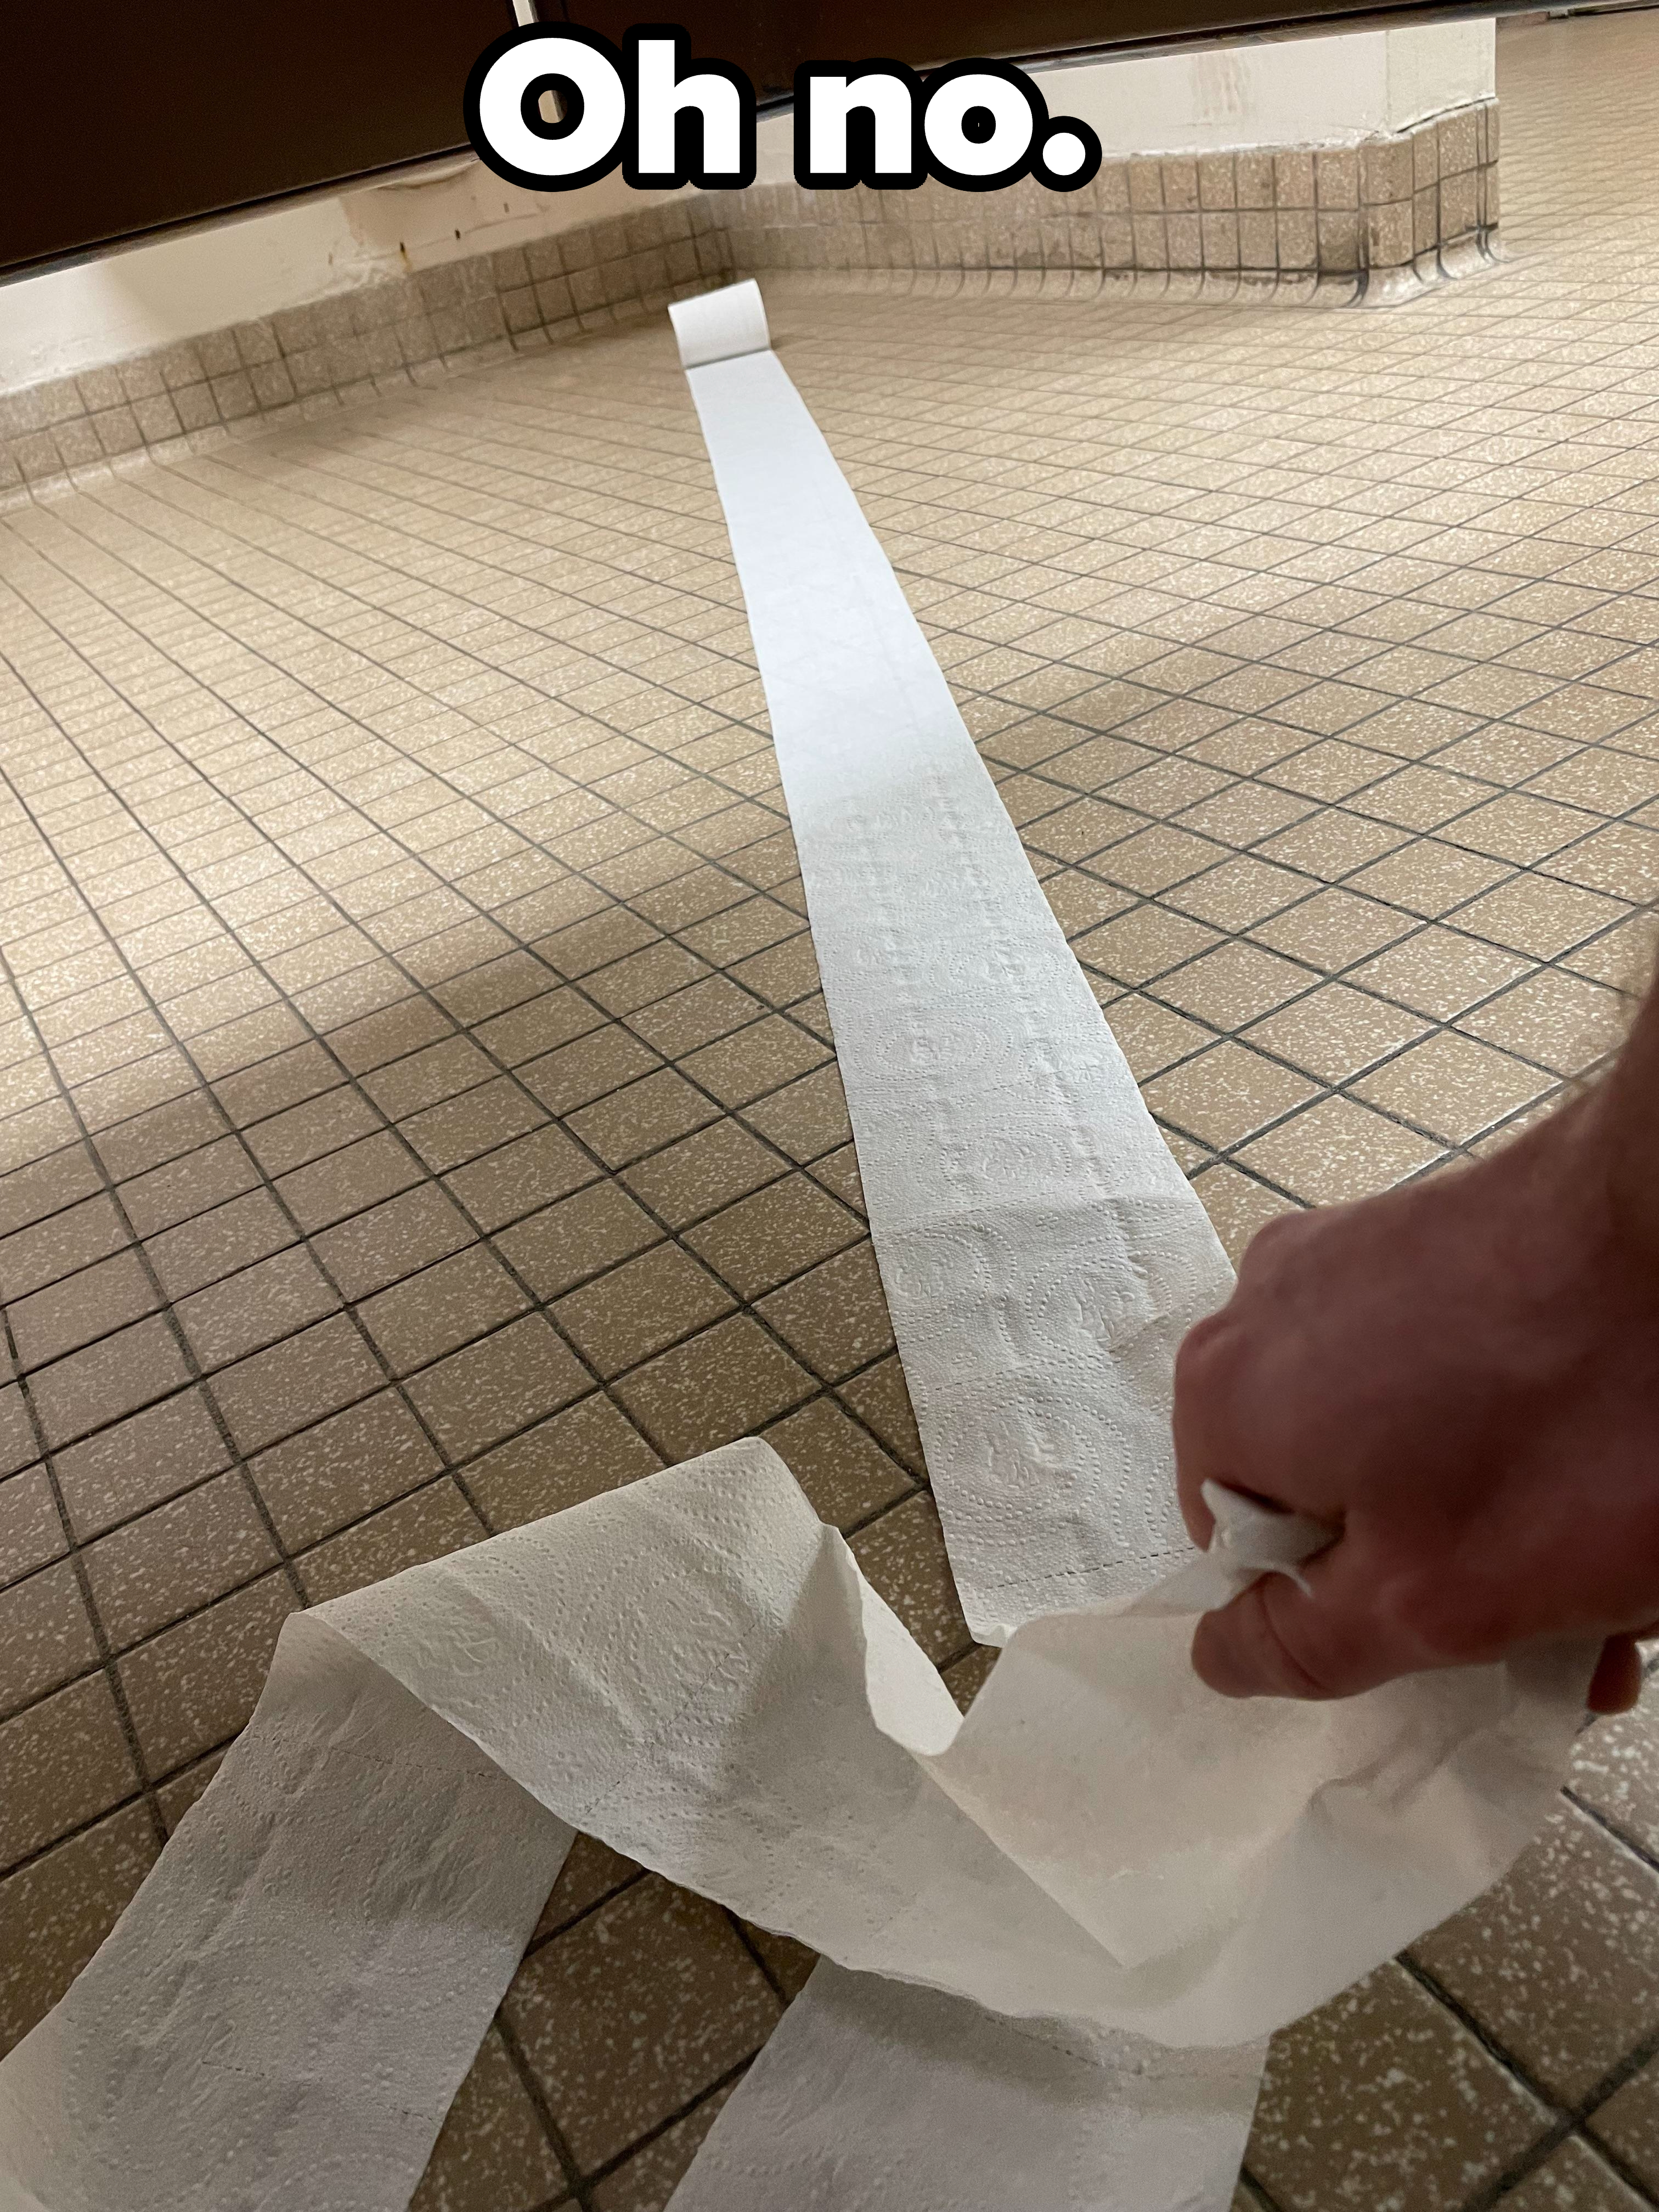 Person holding a long, unraveling toilet paper roll in a bathroom